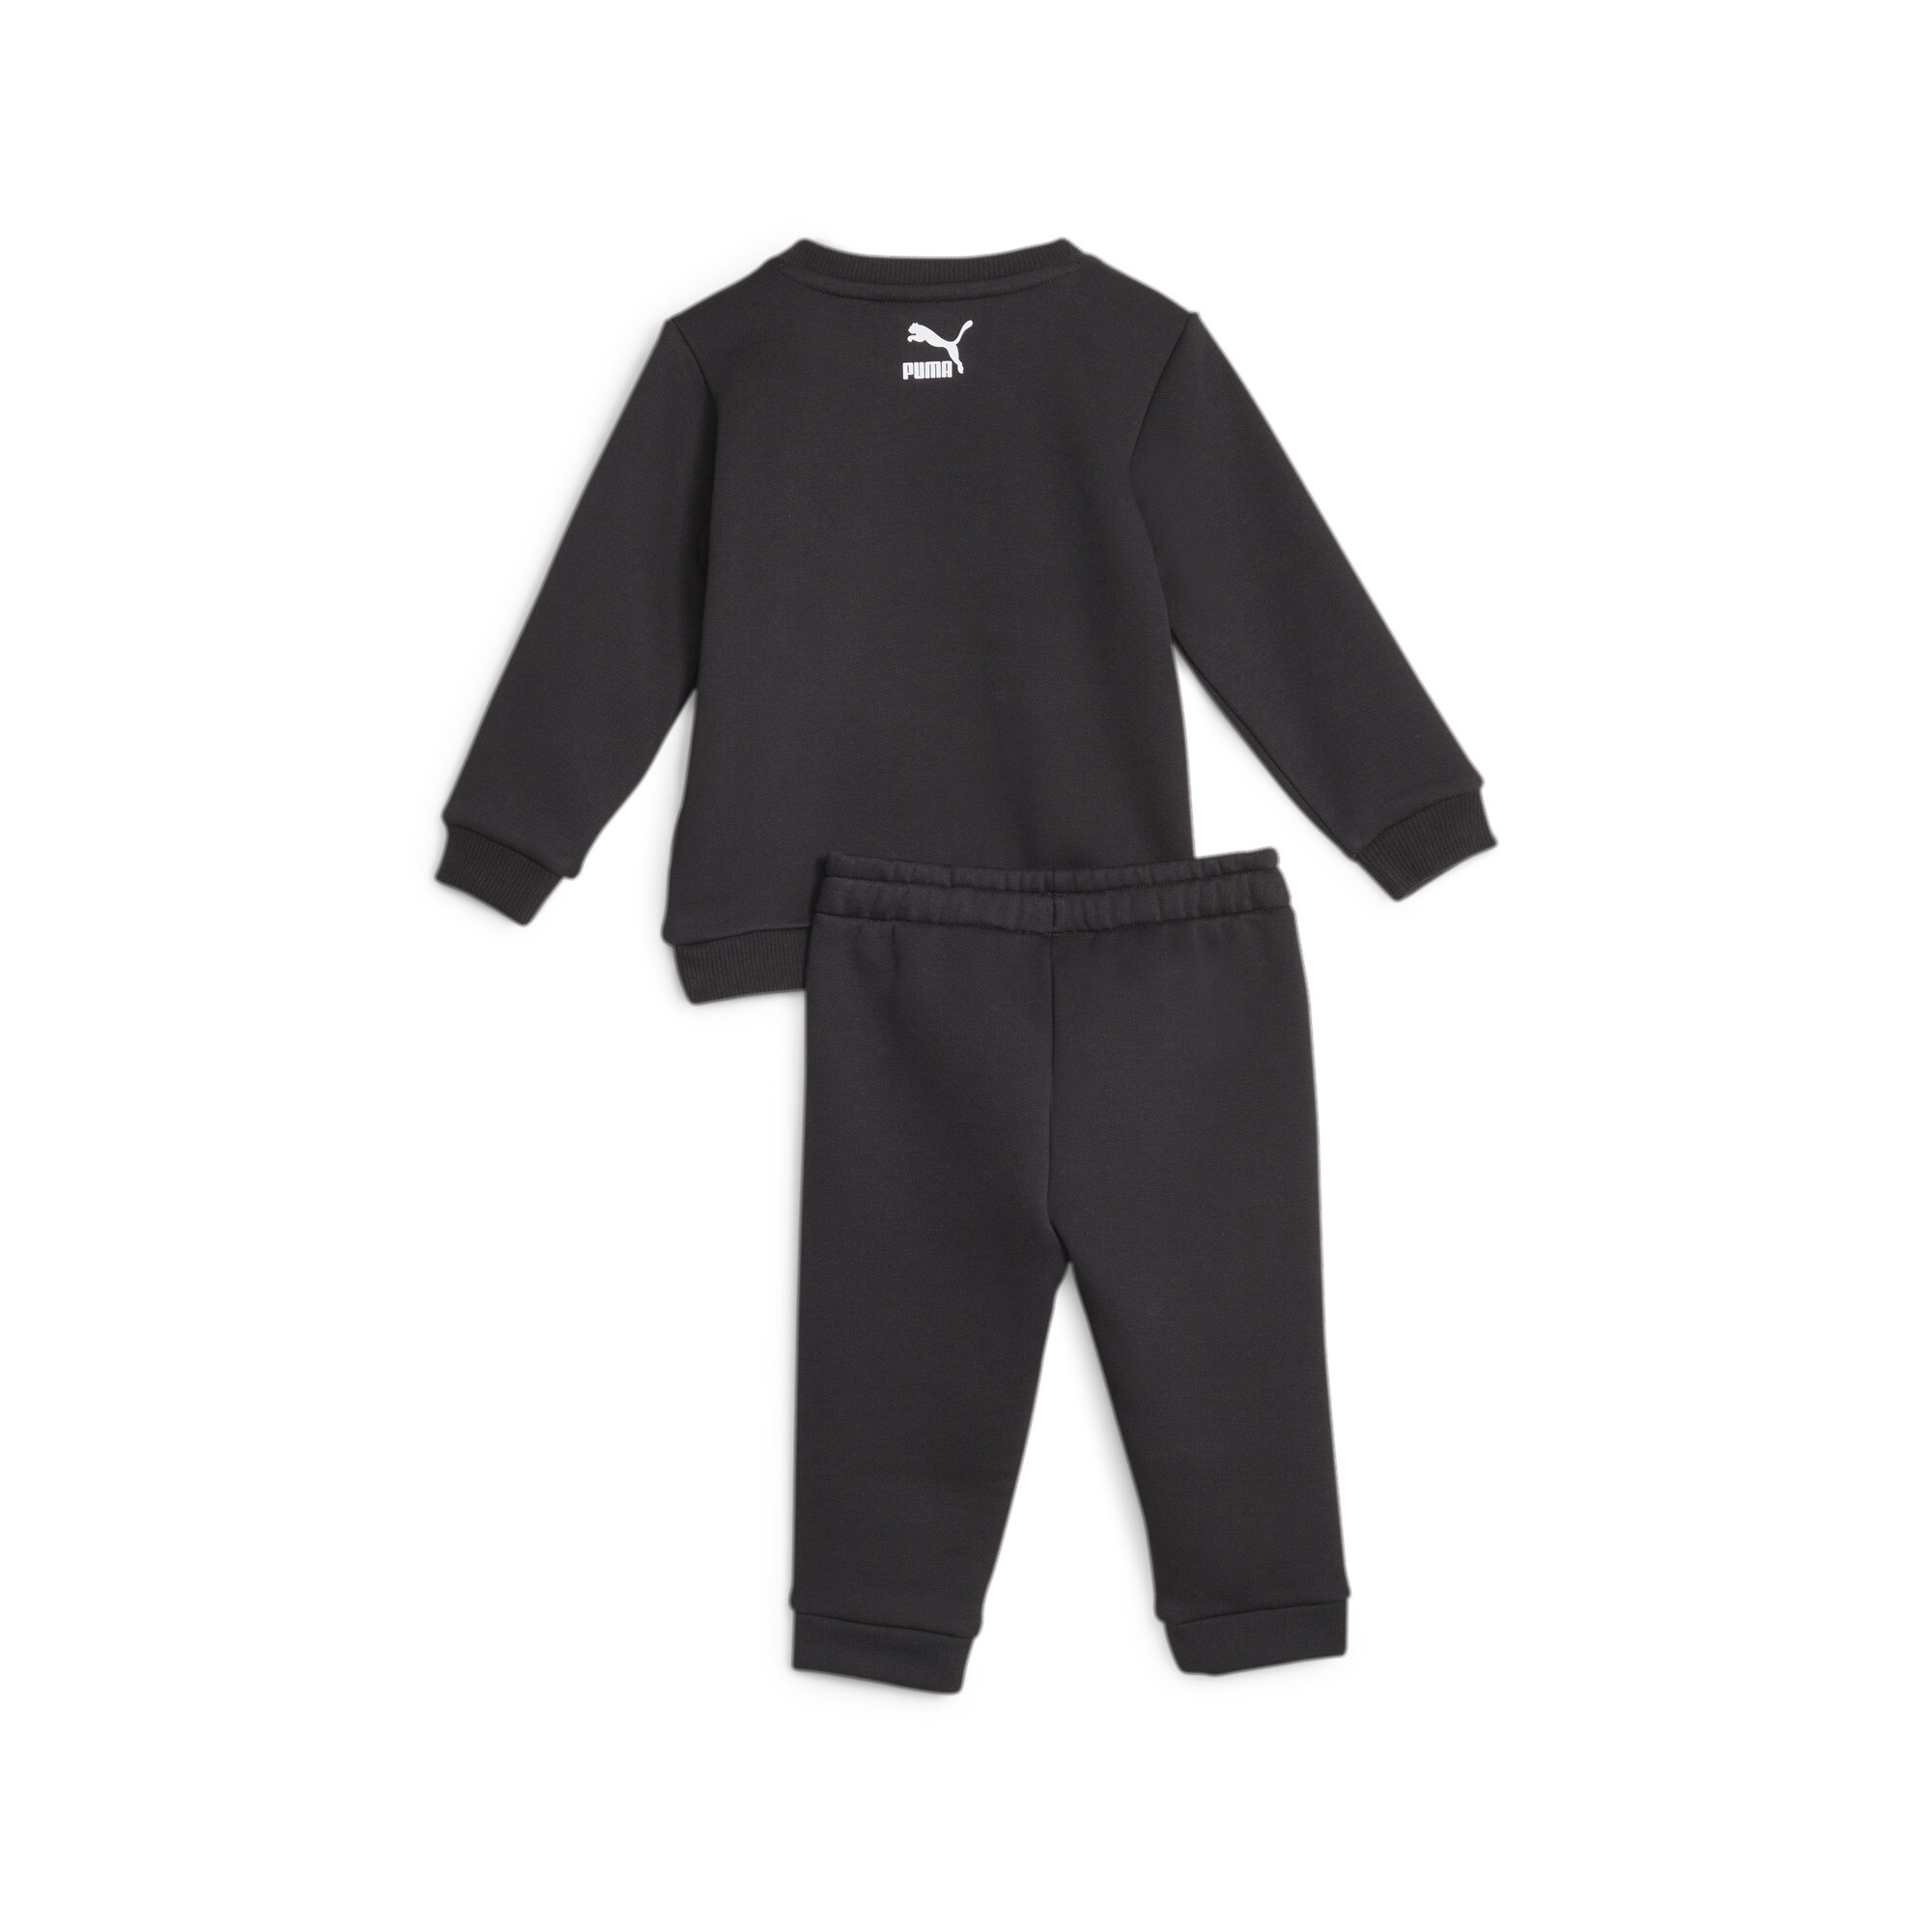 Kids' PUMA X MIRACULOUS Toddlers' Jogger In Black, Size 12-18 Months